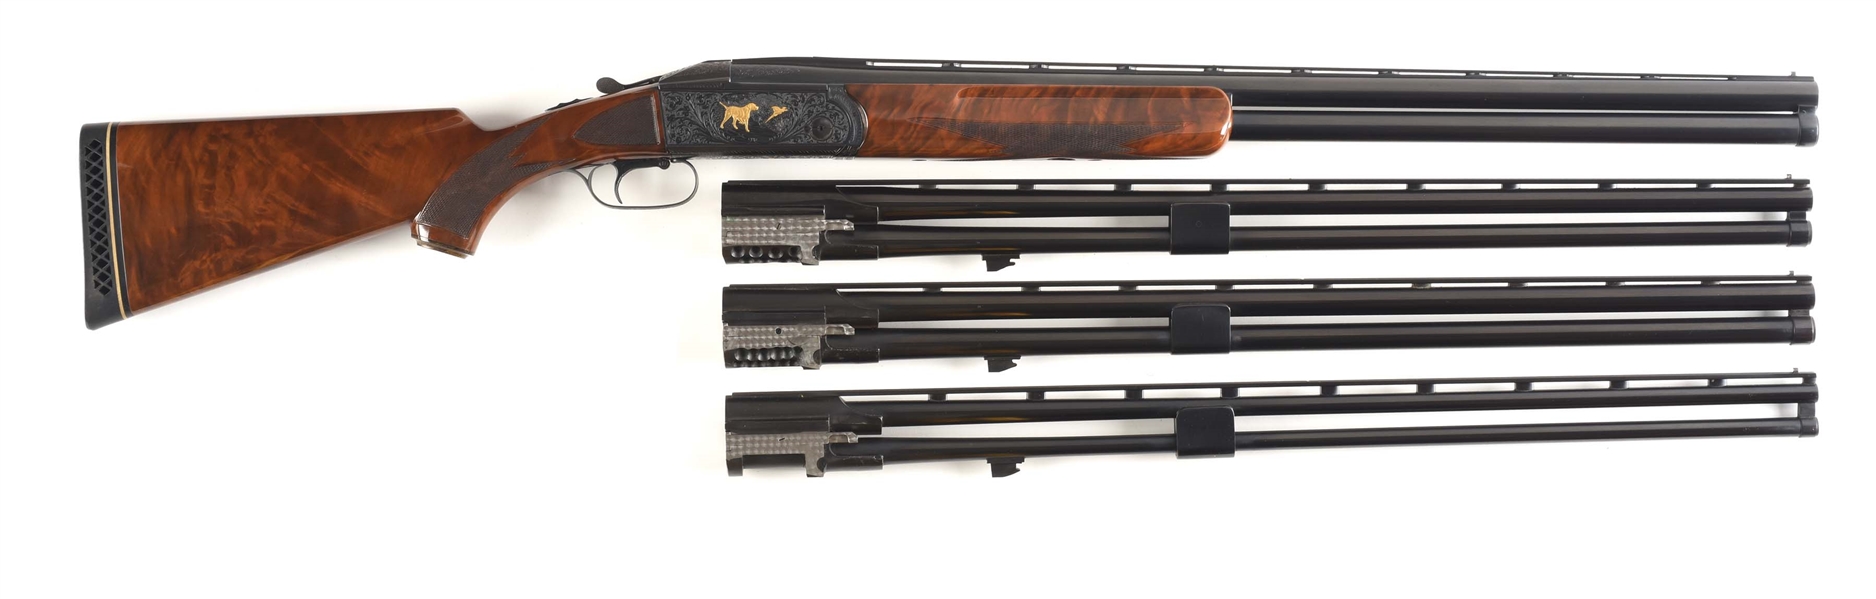 (C) REMINGTON MODEL 32 FOUR BARREL SKEET SET WITH ENGRAVING AND GOLD INLAY REPORTEDLY BY ARNOLD GRIEBEL AND CASE.